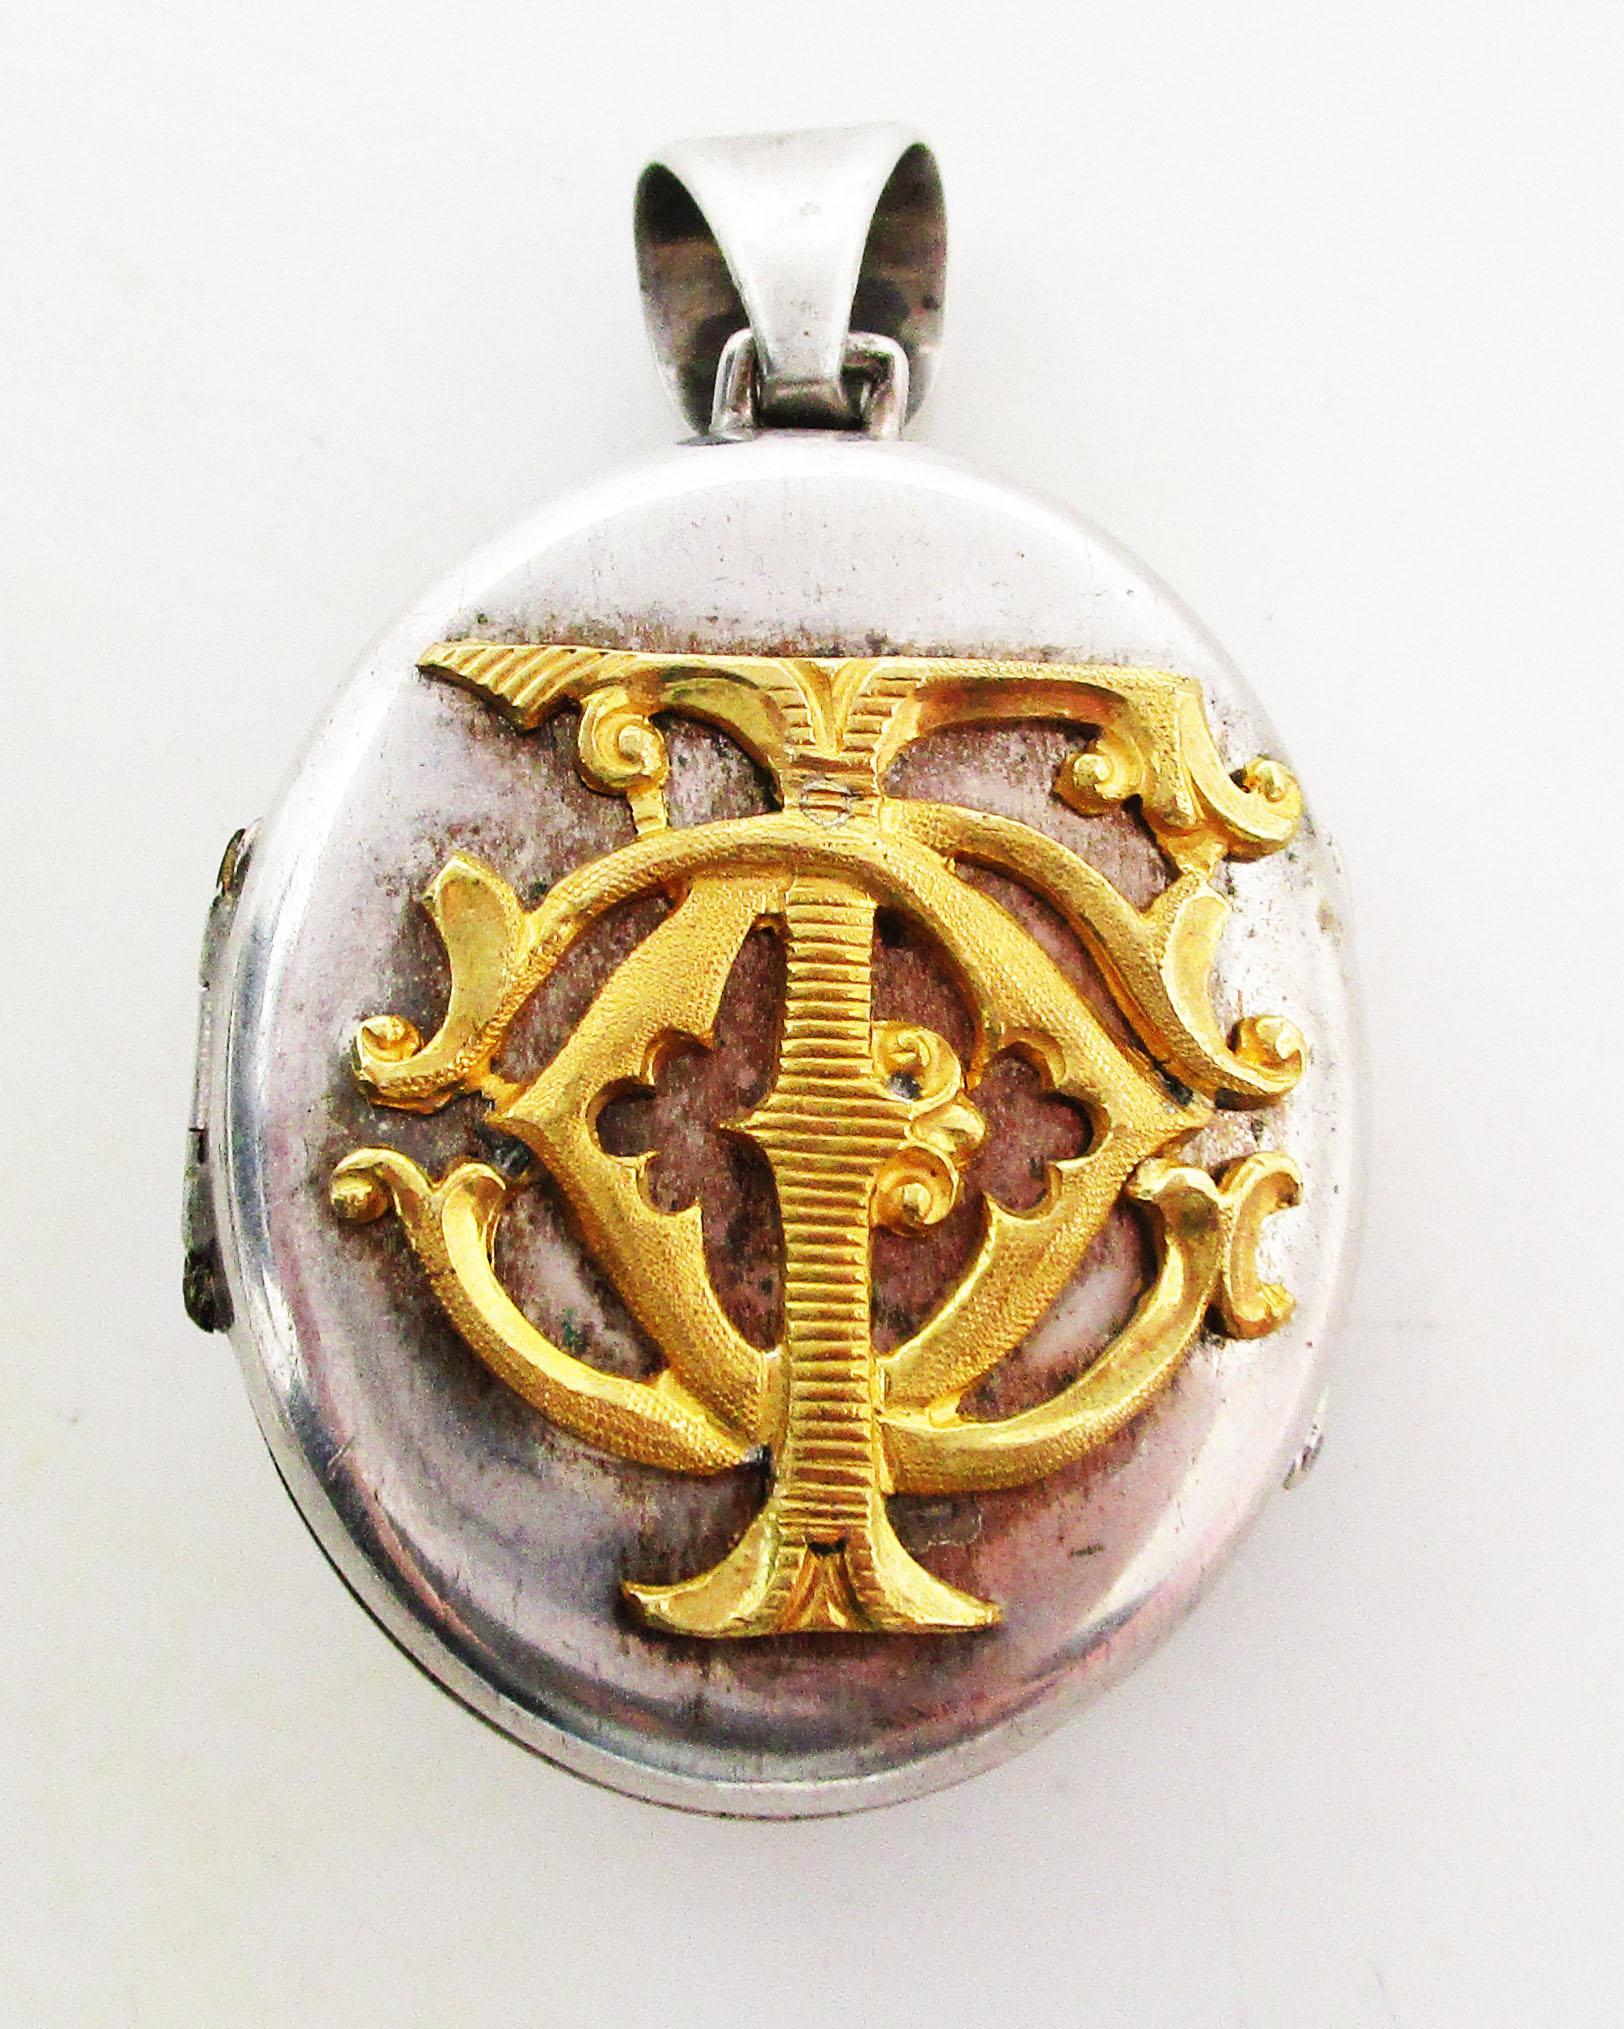 This is an incredible large Victorian locket in sterling silver featuring a remarkable gold washed royal fusiliers emblem! The locket has a vermeille accent on each side. One side features the symbol of the royal fusiliers over a pair of crossed